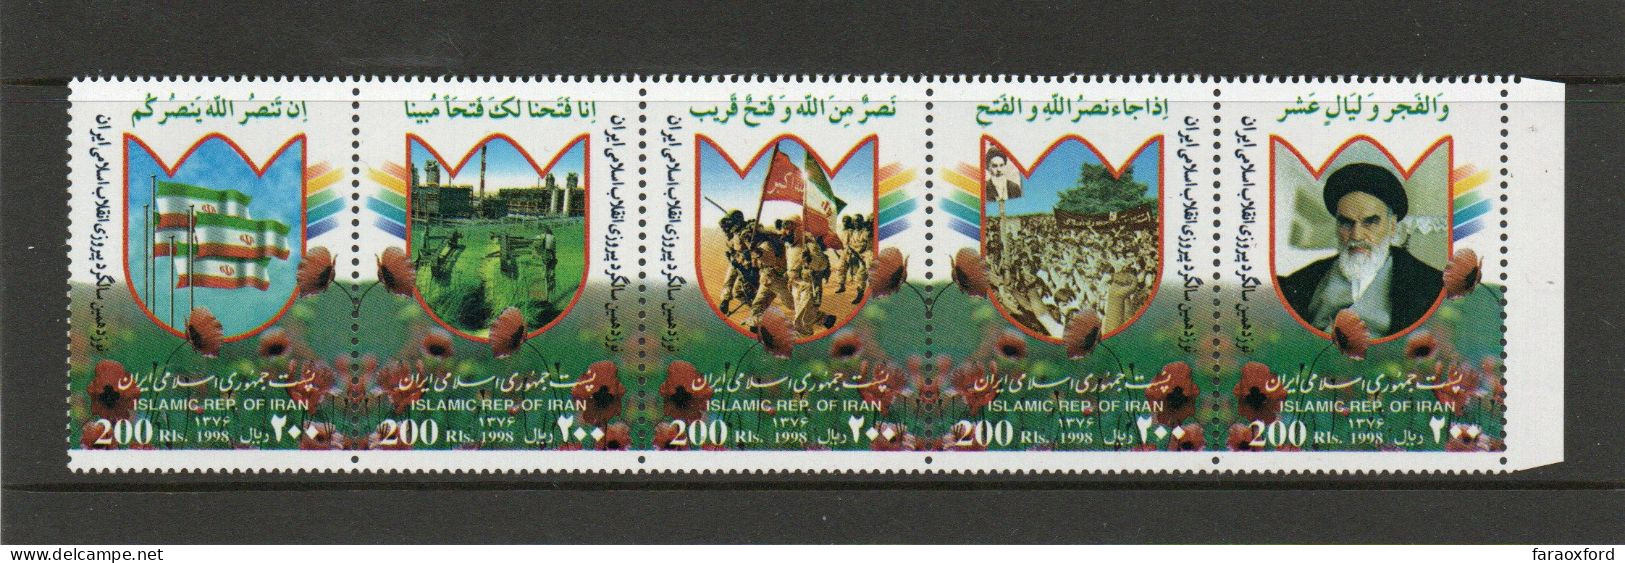 IRAN - ايران - PERSIA - 1998 - ISLAMIC REVOLUTION - COMPLETE SET OF STAMPS - MINT NOT HINGED - Iran